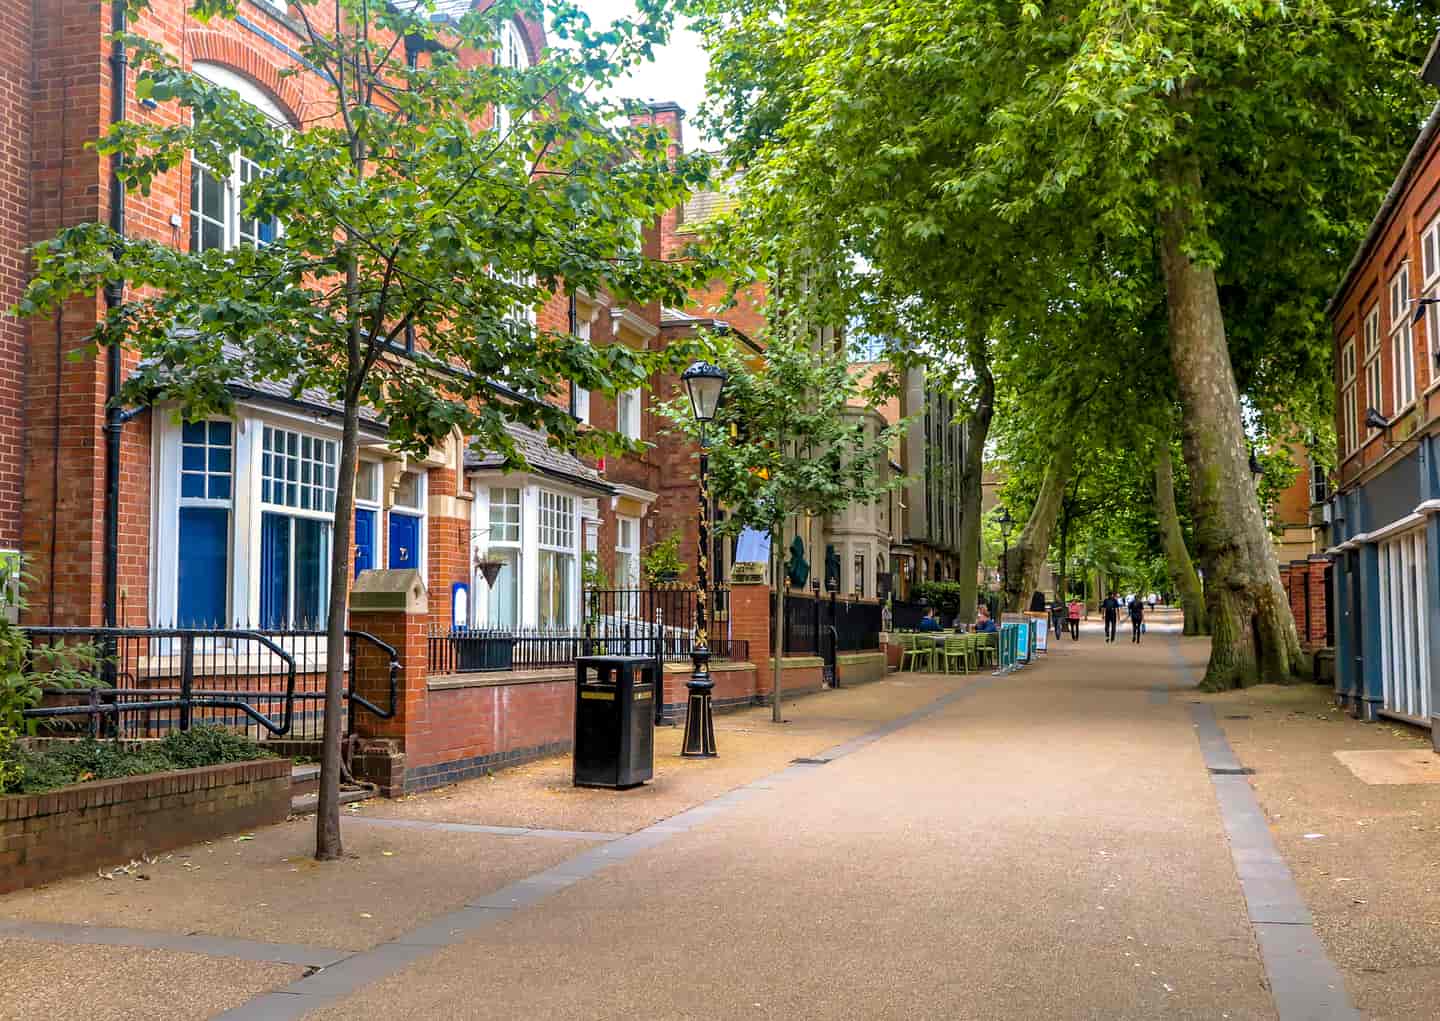 Student Accommodation in Leicester - A stroll down New Walk